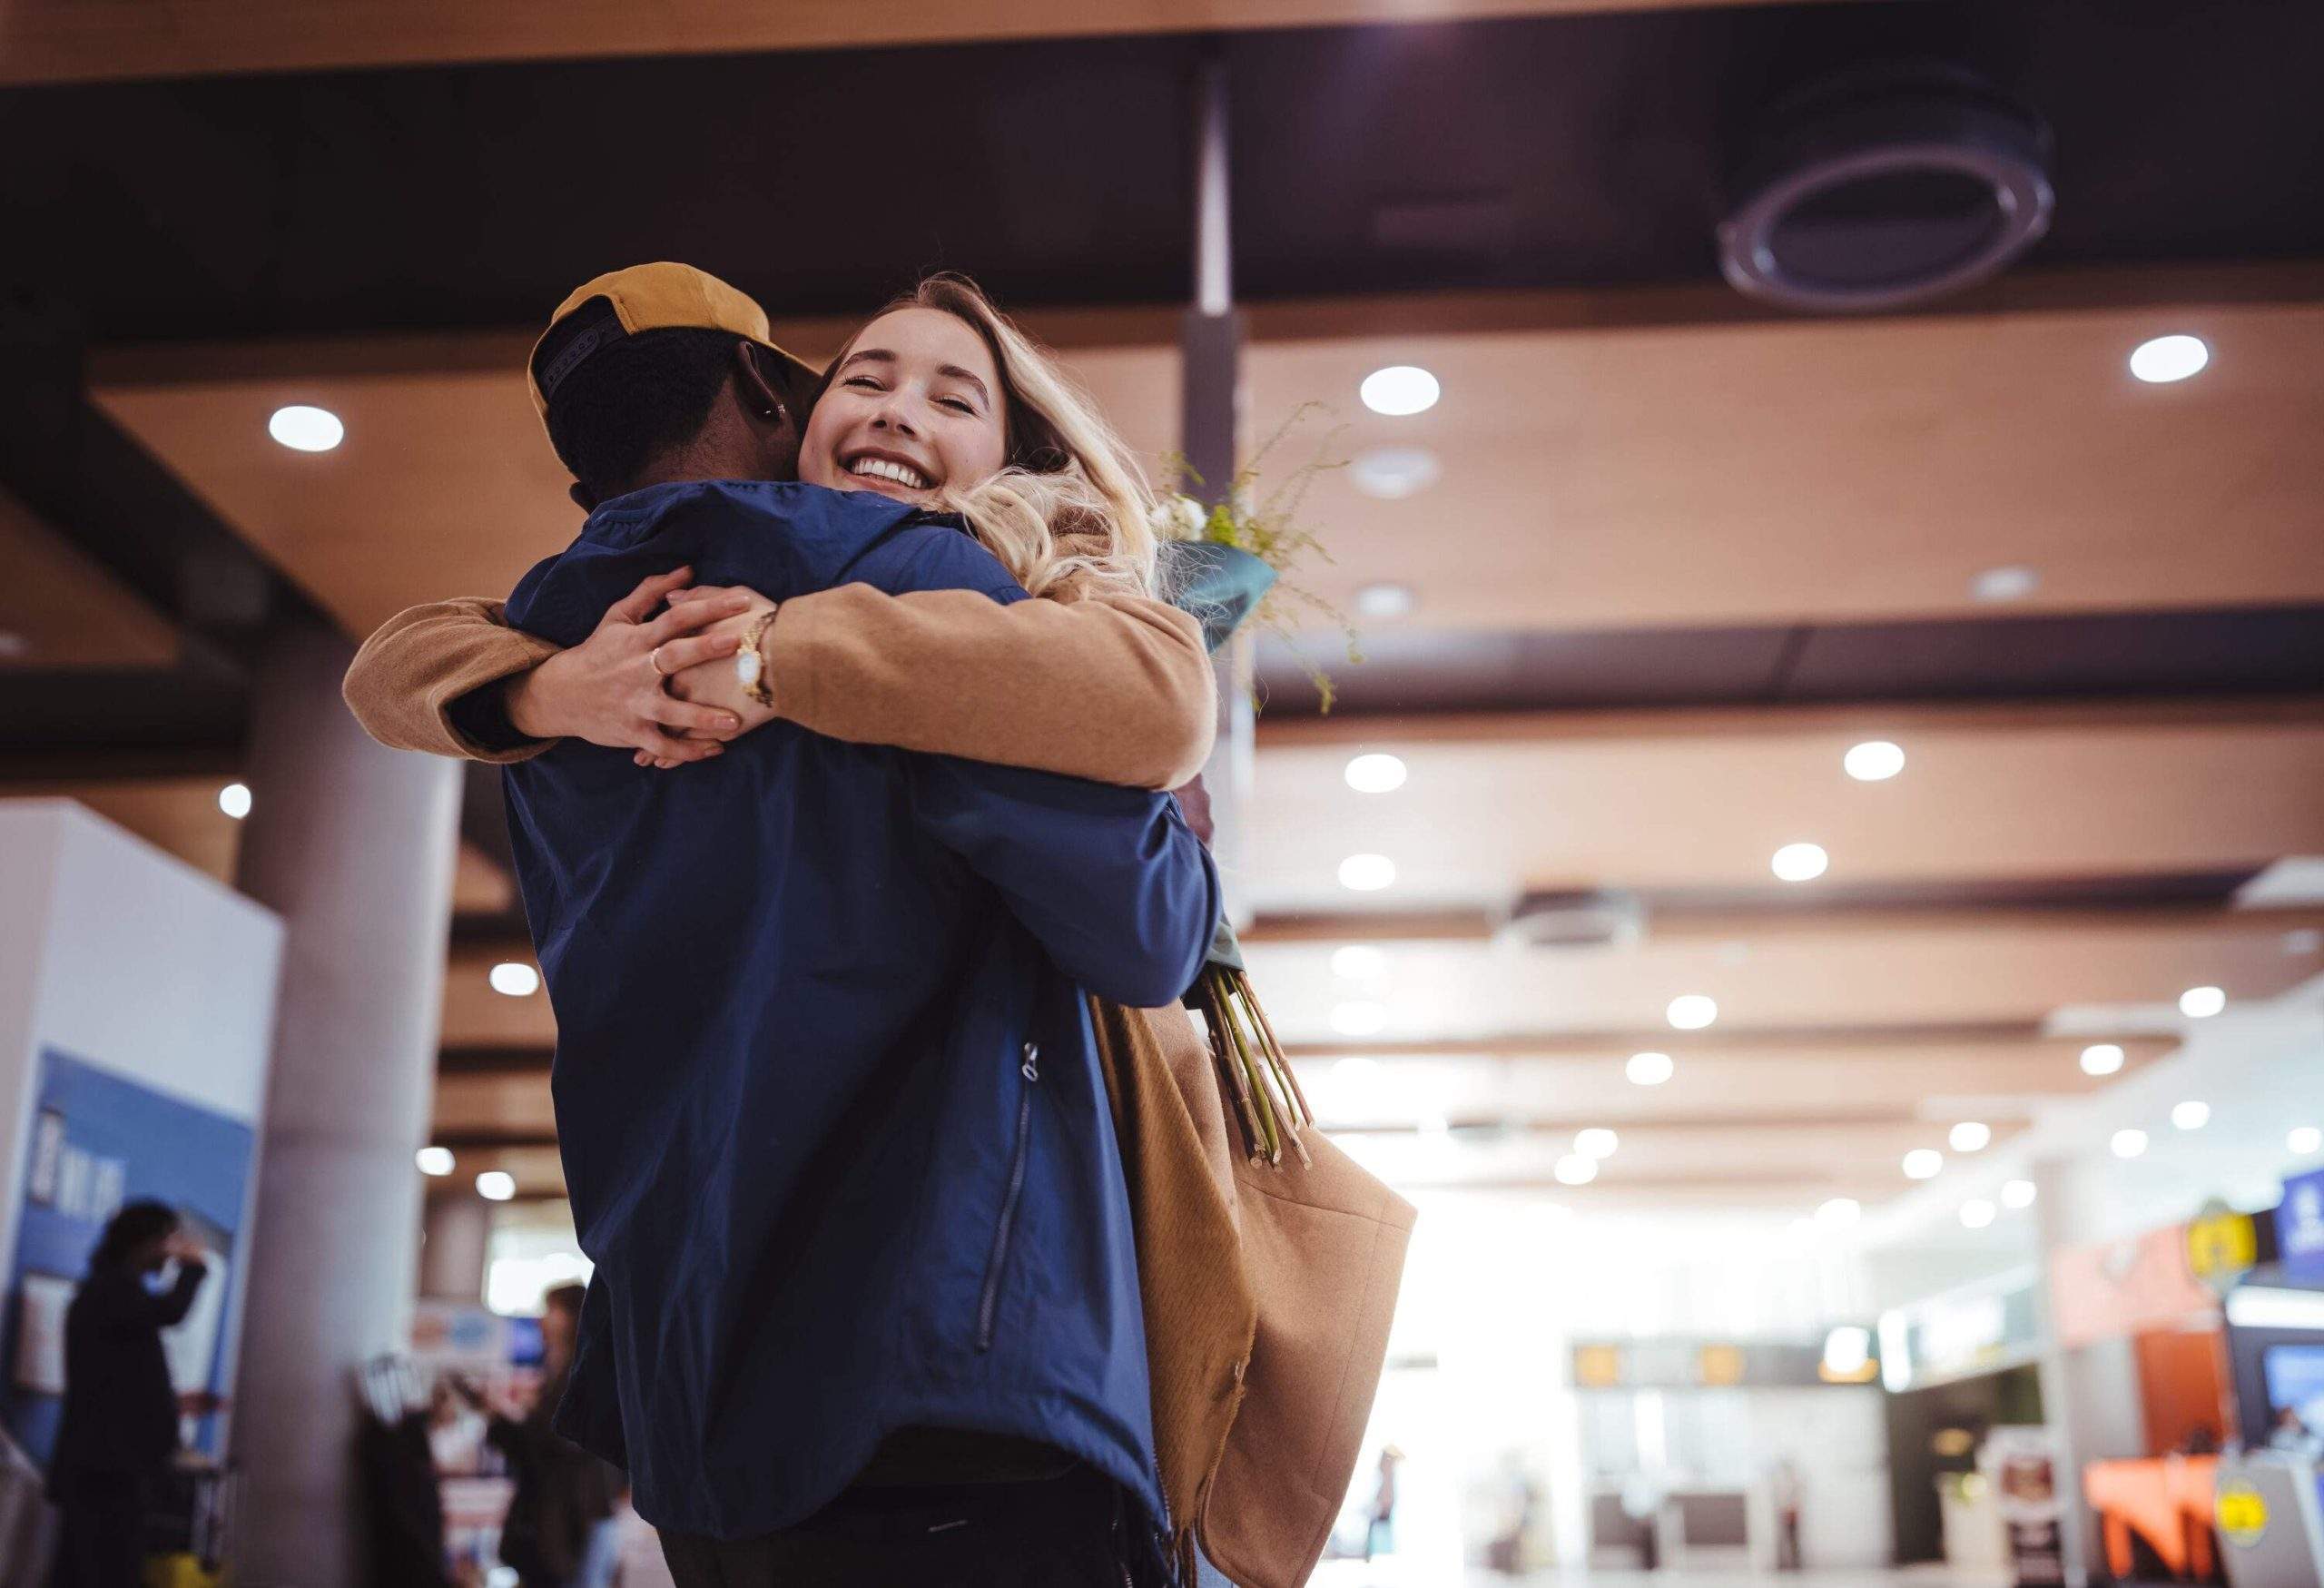 A joyful multi-ethnic couple excitedly reunites and embraces each other in the bustling atmosphere of an airport.